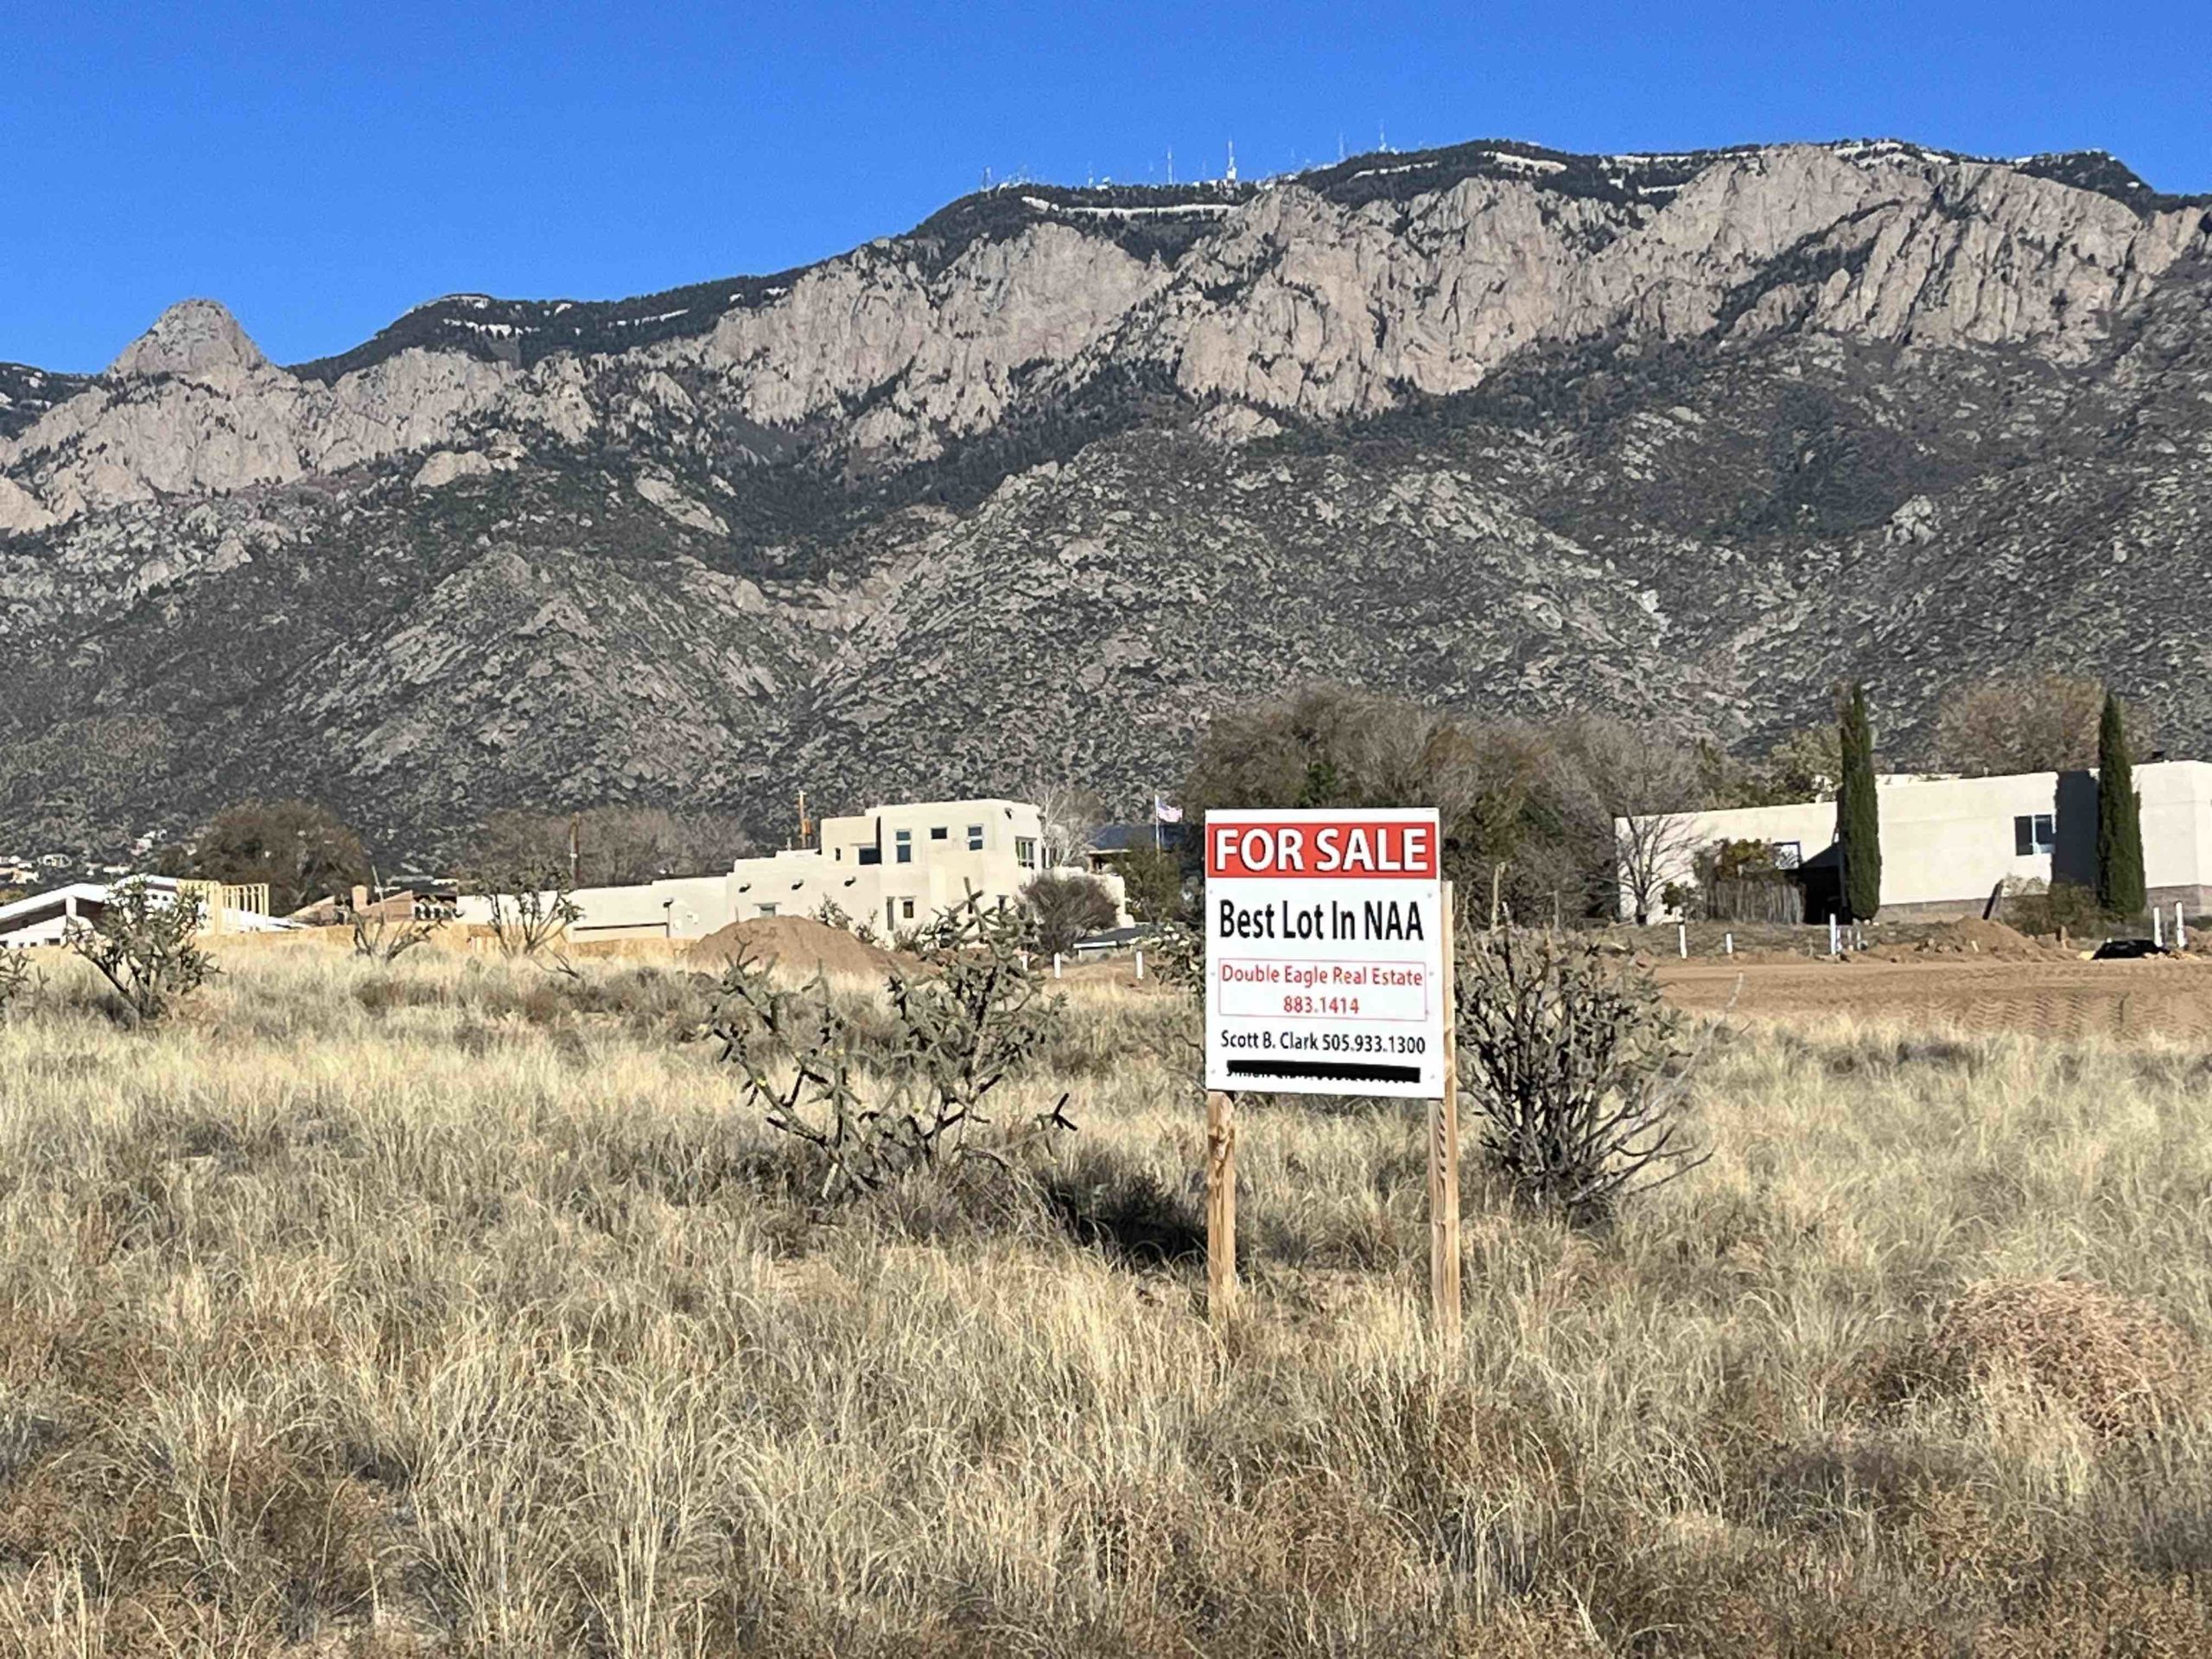 A three lot 2.33-acre property for sale on the corner of Browning and Oakland in North Albuquerque Acres. (Scott Albright/Neighborhood Journal)